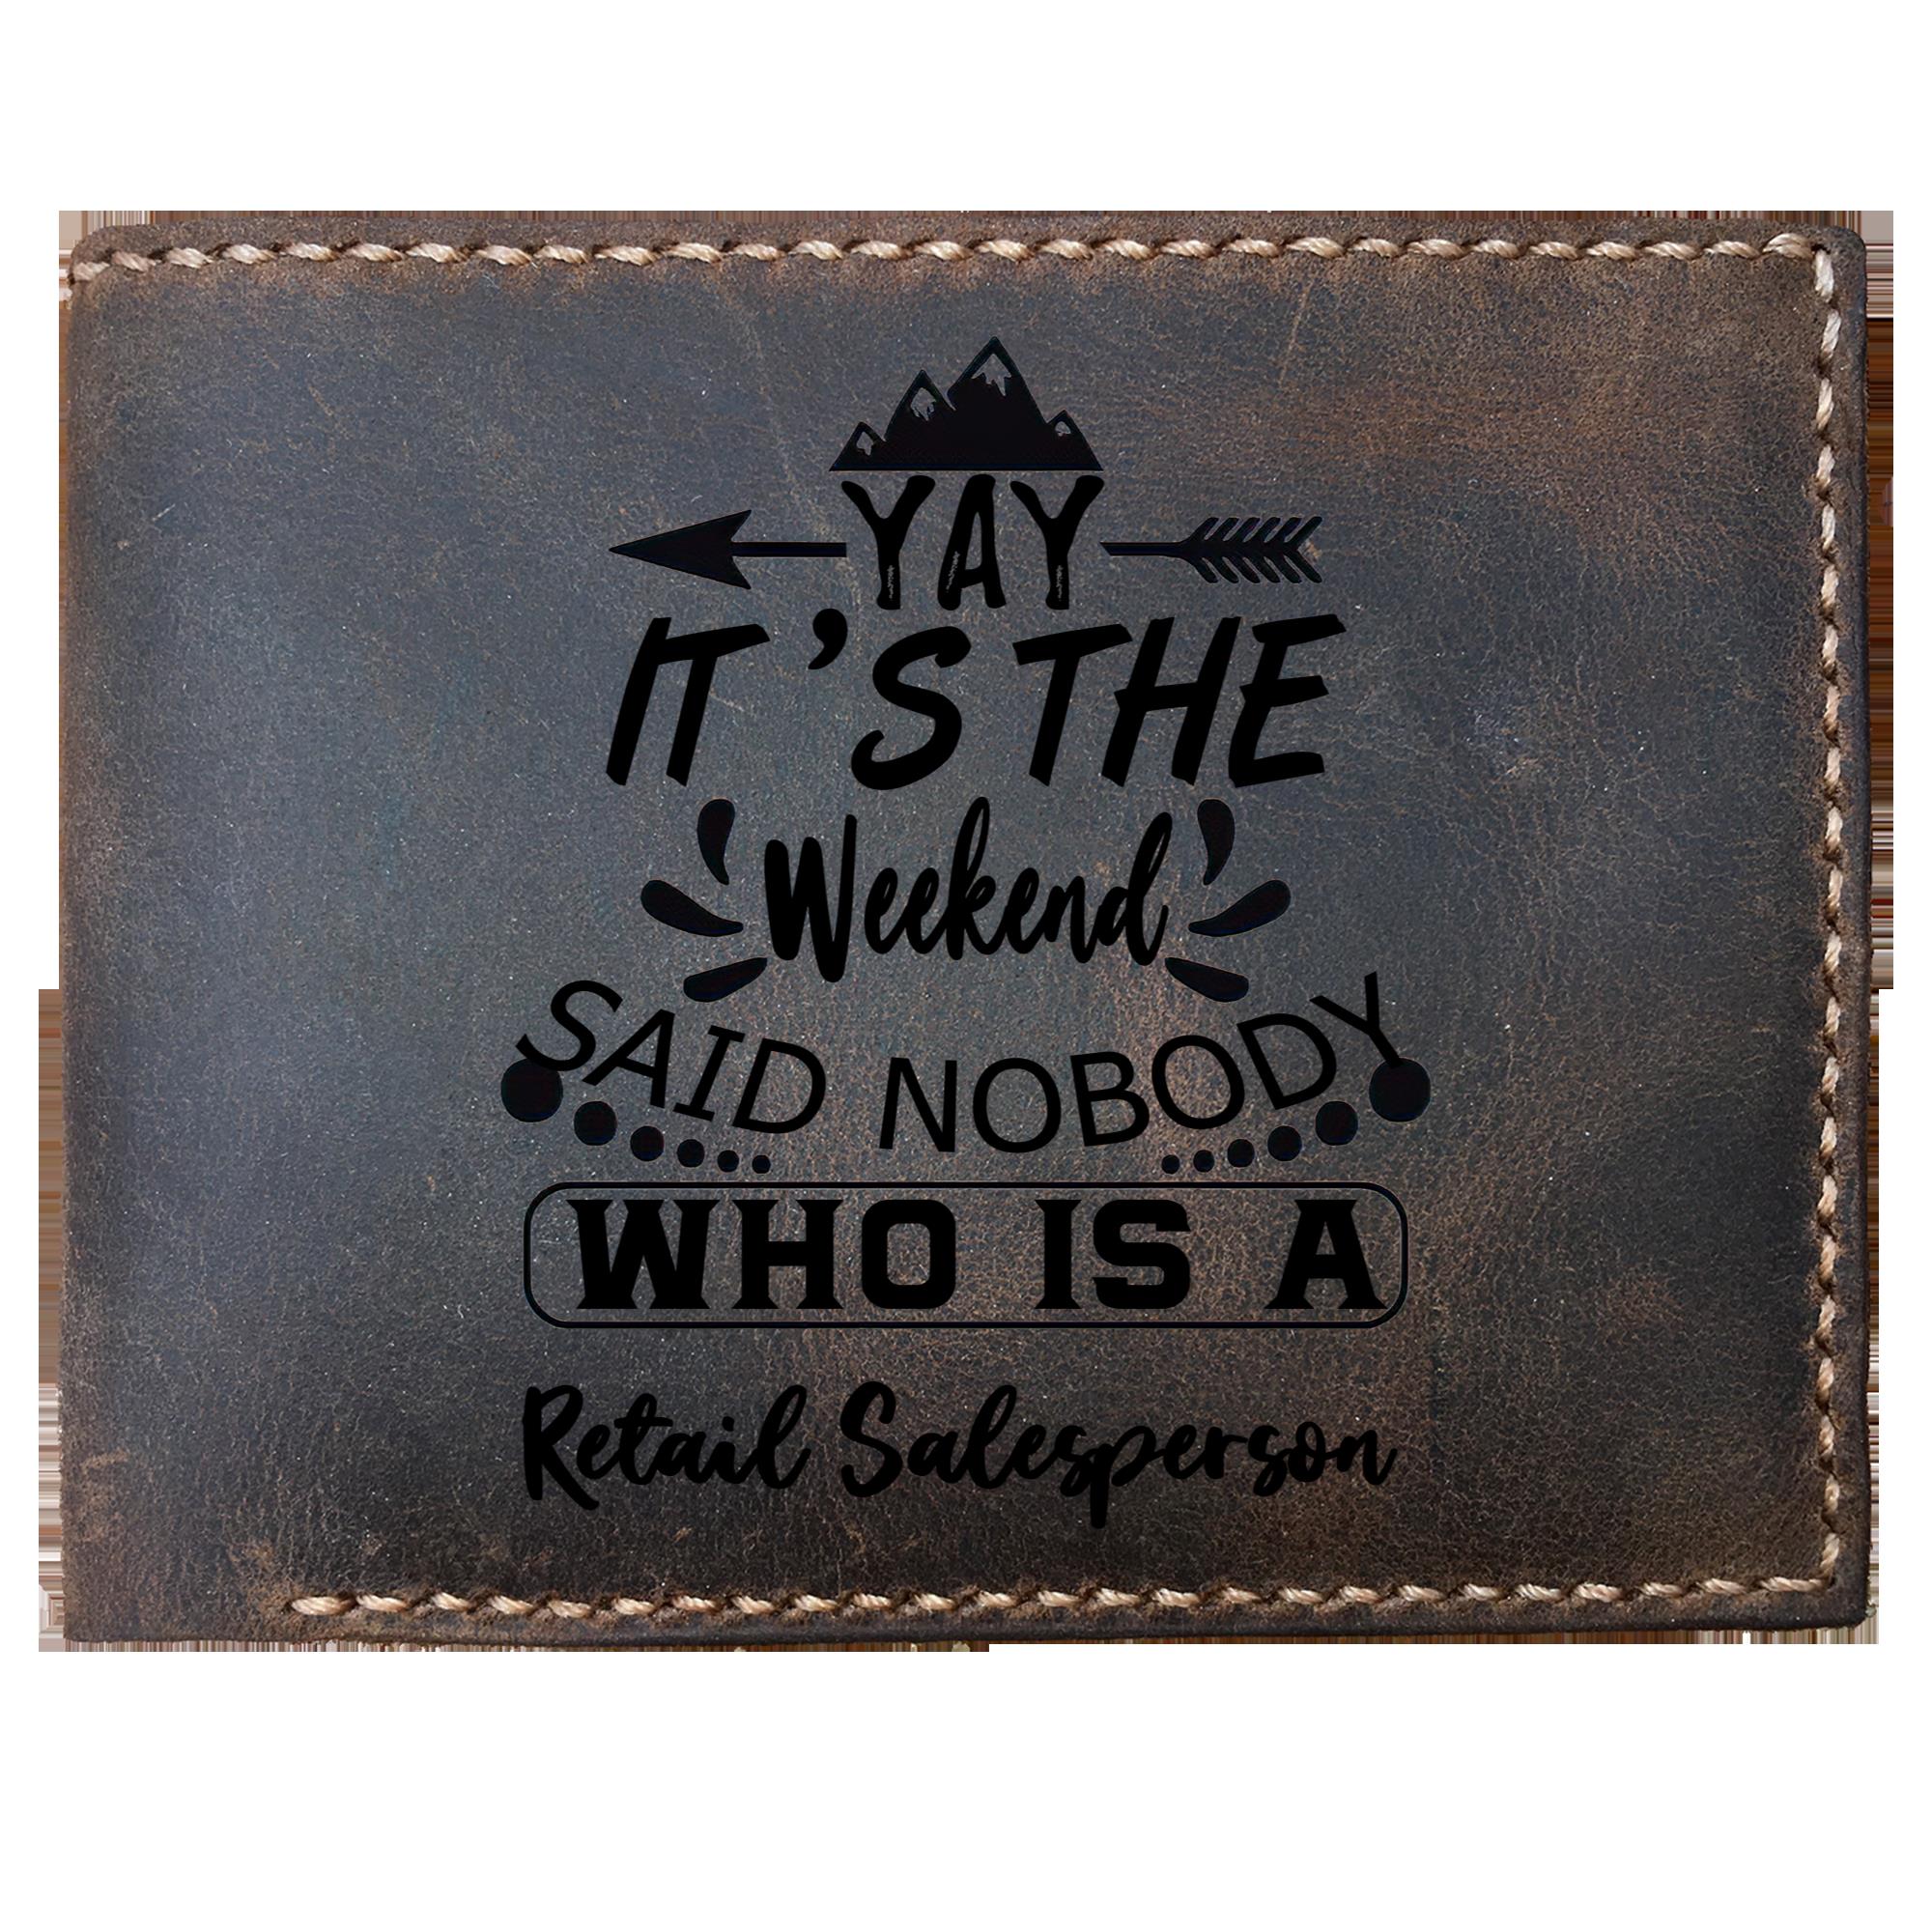 Skitongifts Funny Custom Laser Engraved Bifold Leather Wallet For Men, It's The Weekend Said Nobody Who Is A Retail Salesperson, Father's Day Gifts